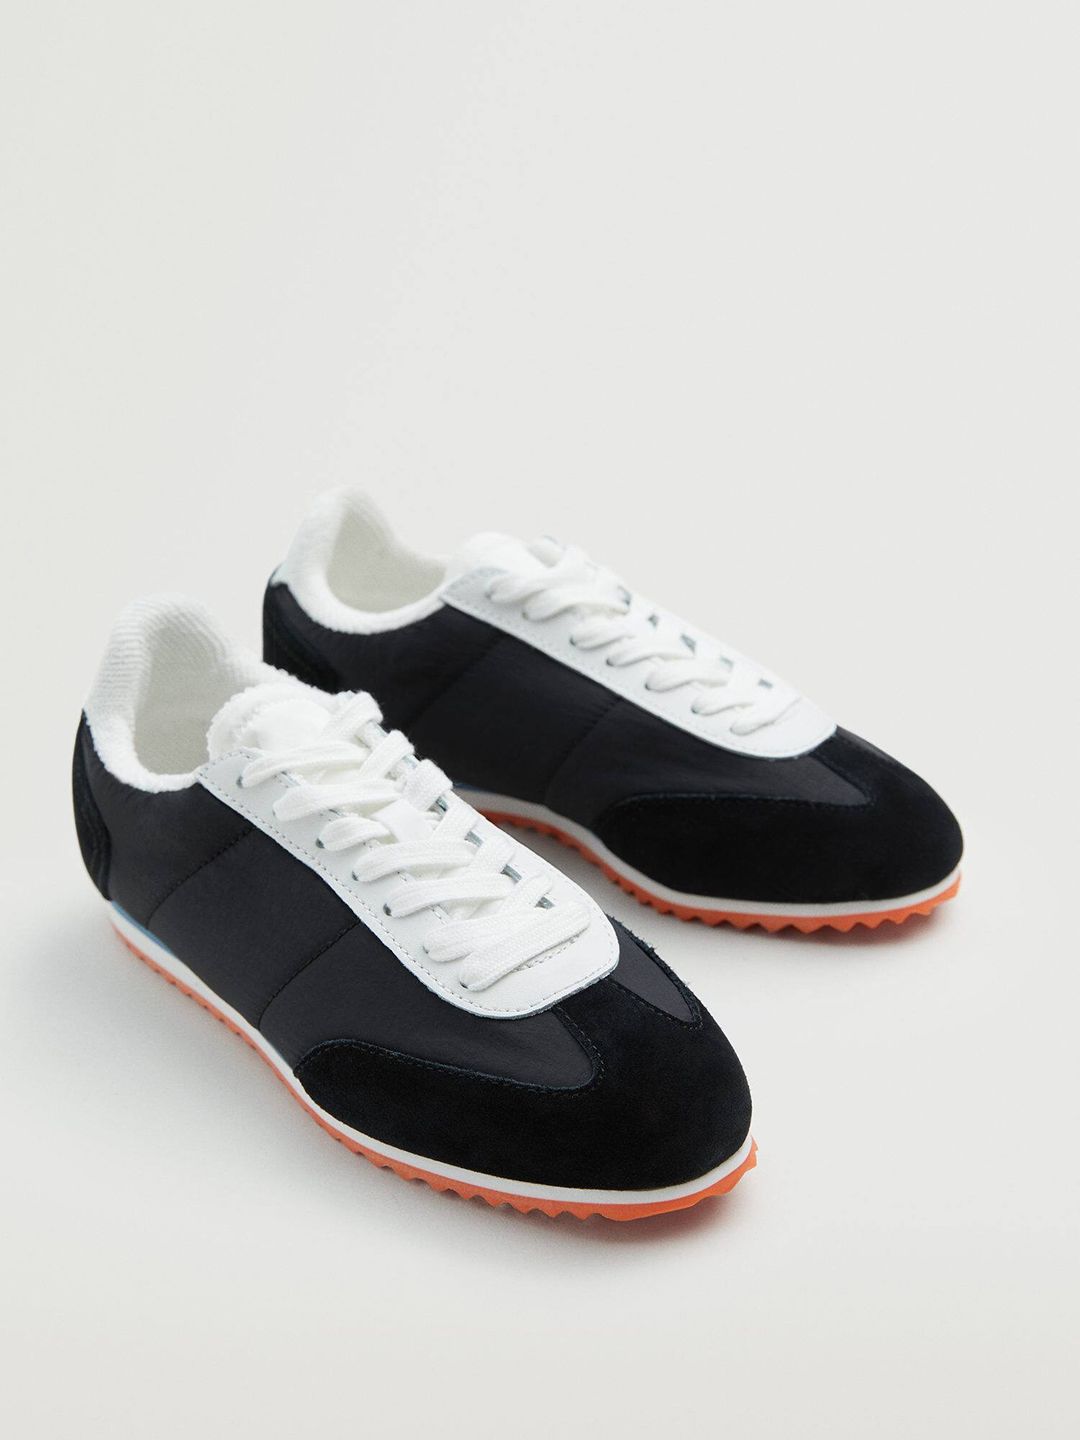 MANGO Women Black & White Solid Sneakers Price in India